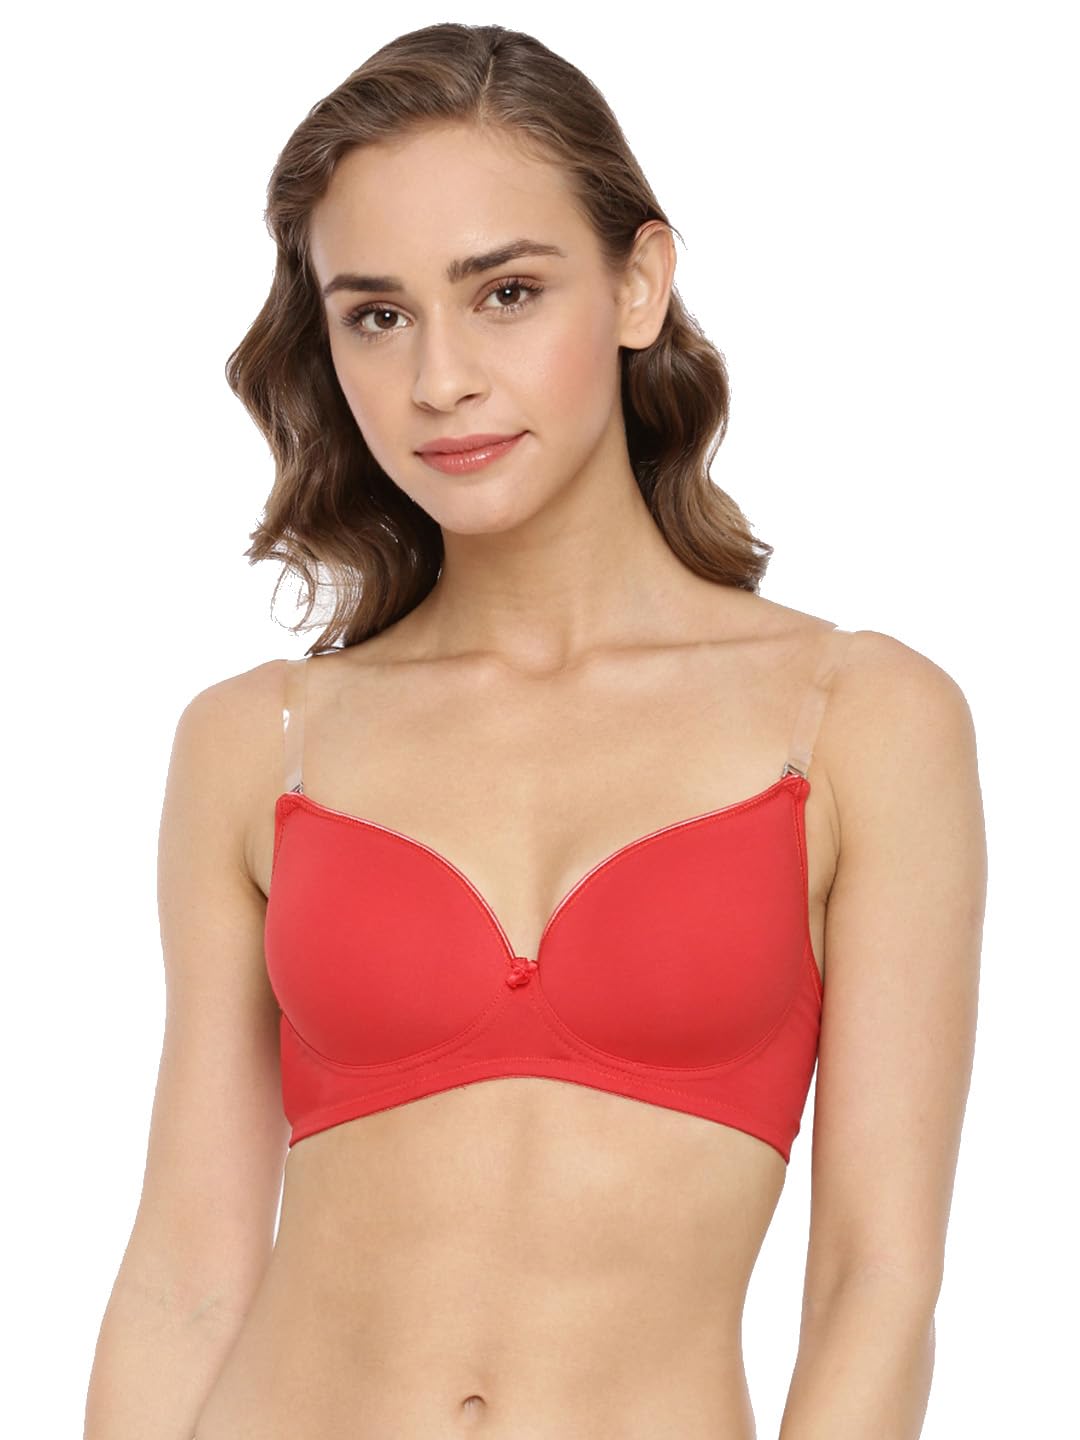 Buy Amante- Cotton Casuals Padded Non-Wired T-Shirt Bra Online